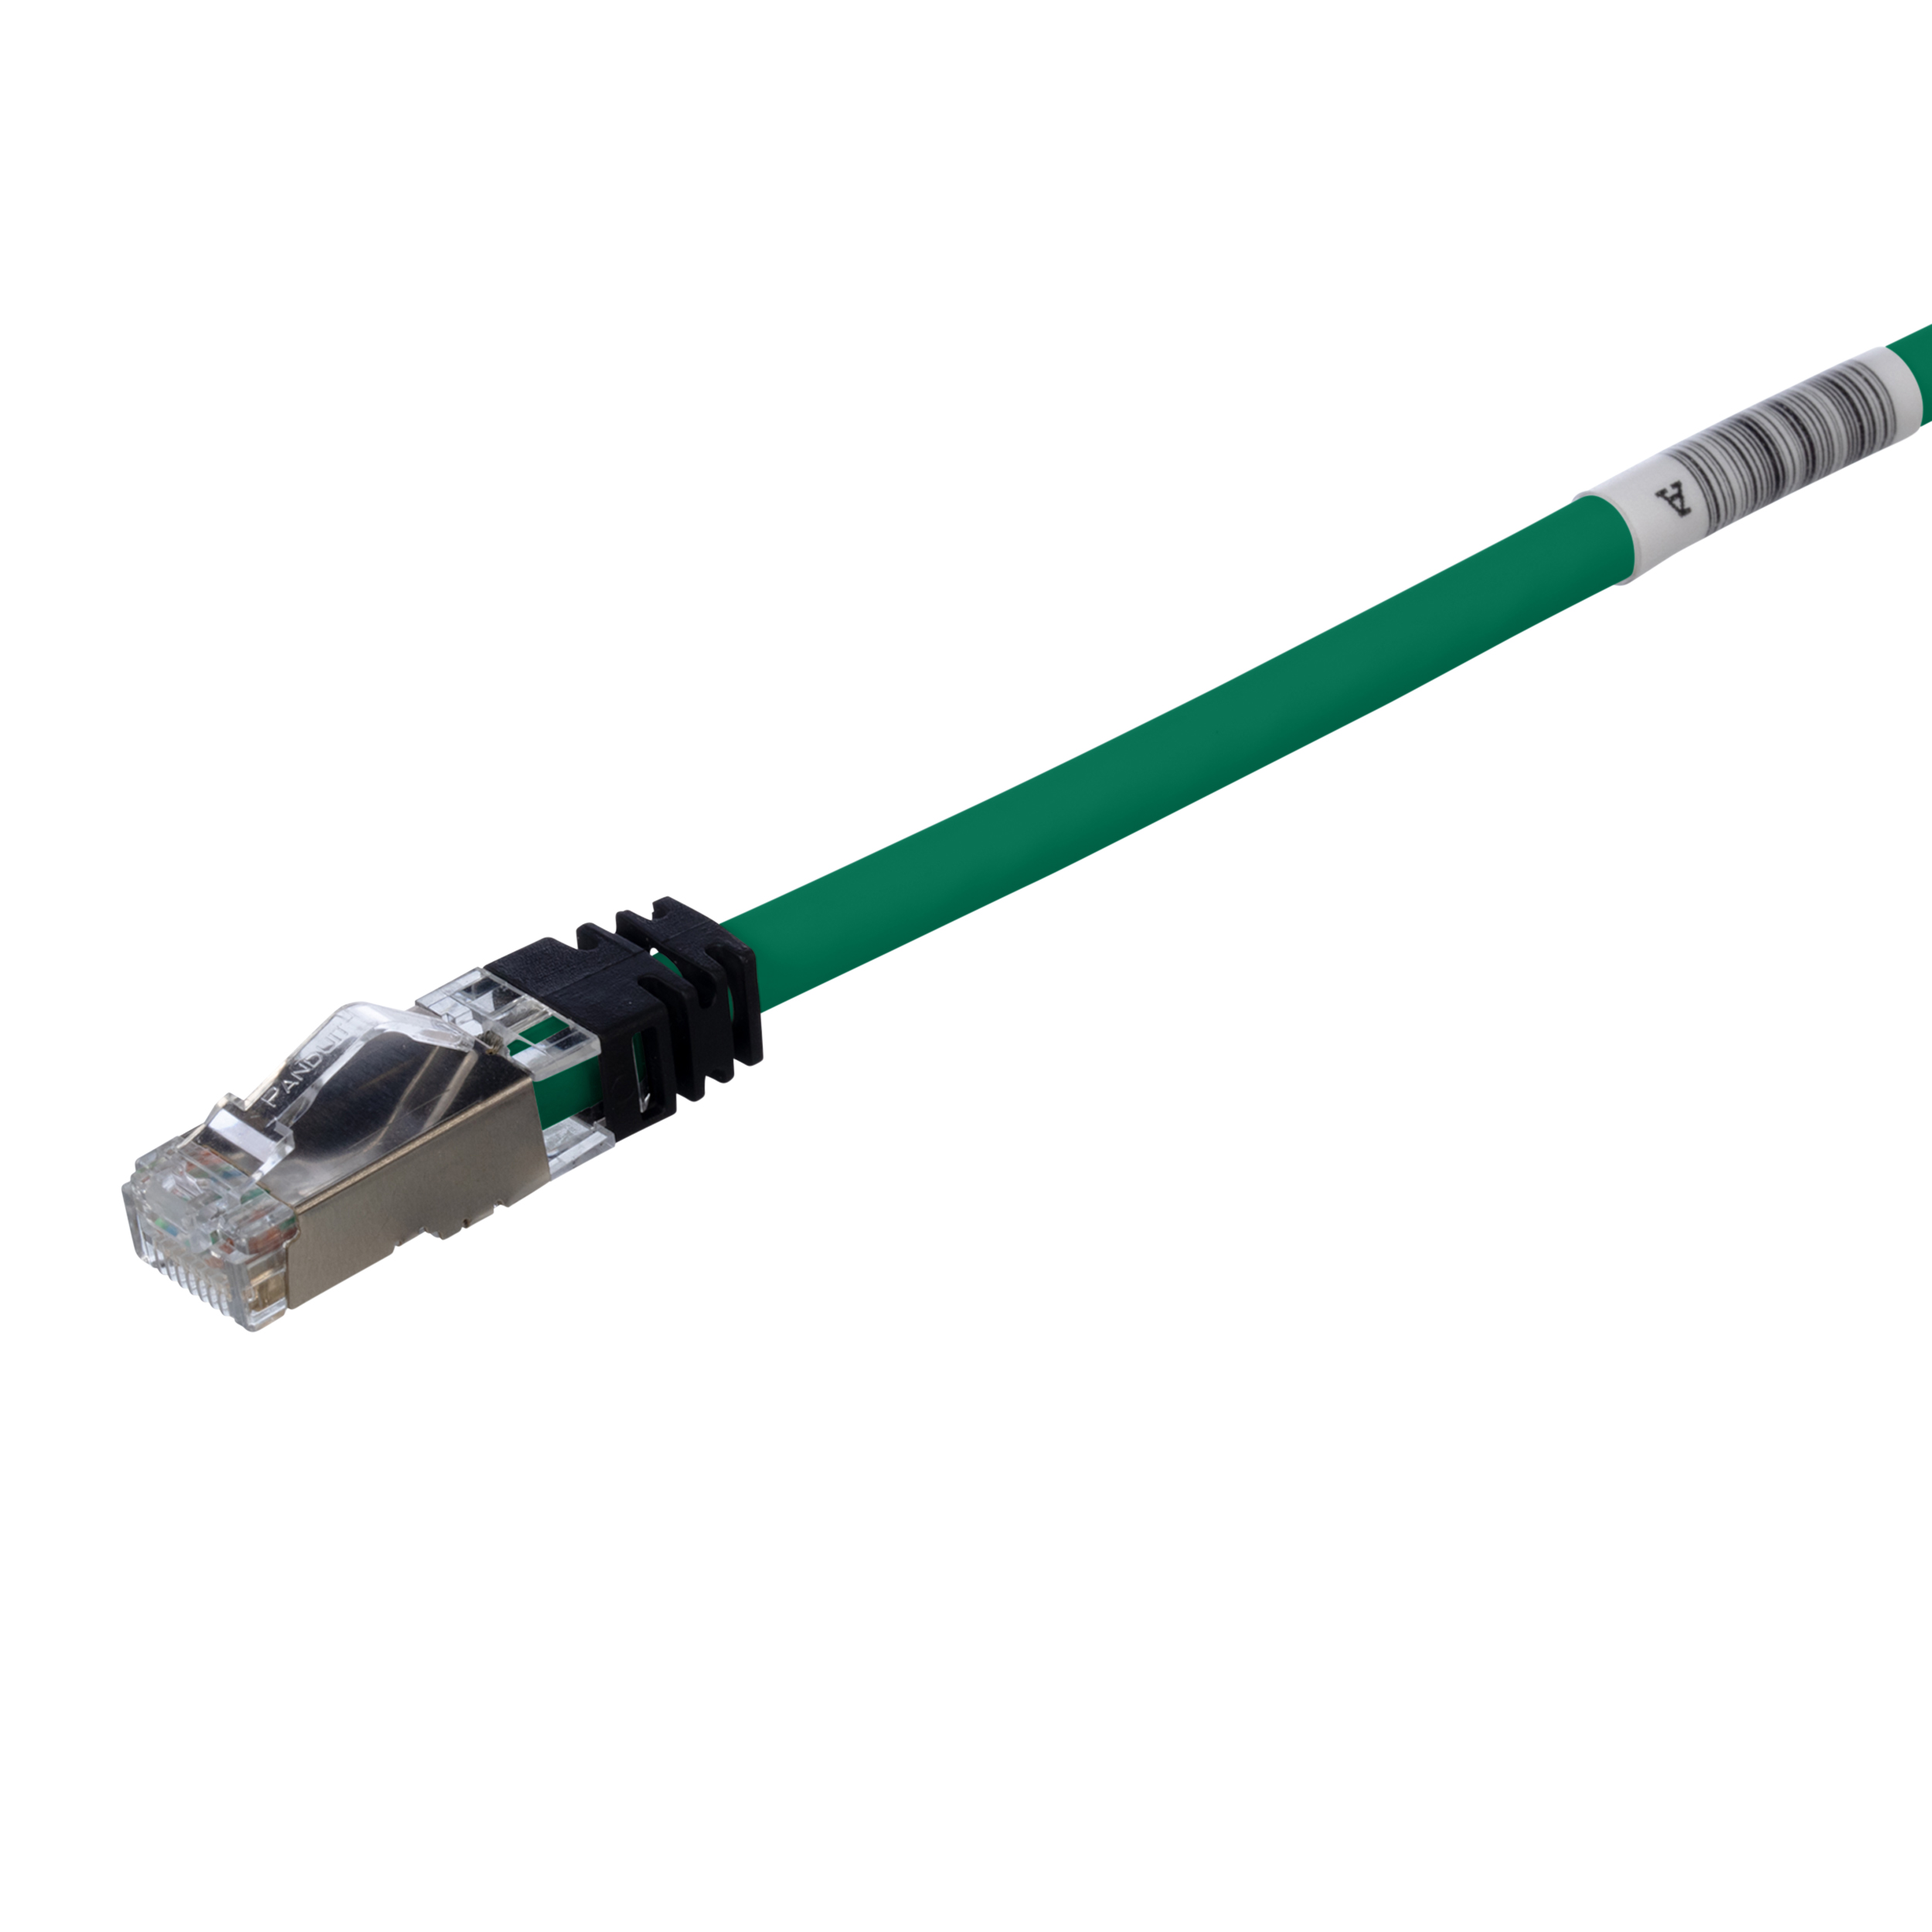 Cat 6A 26 AWG Shielded Patch Cord, 1.5 m, Green